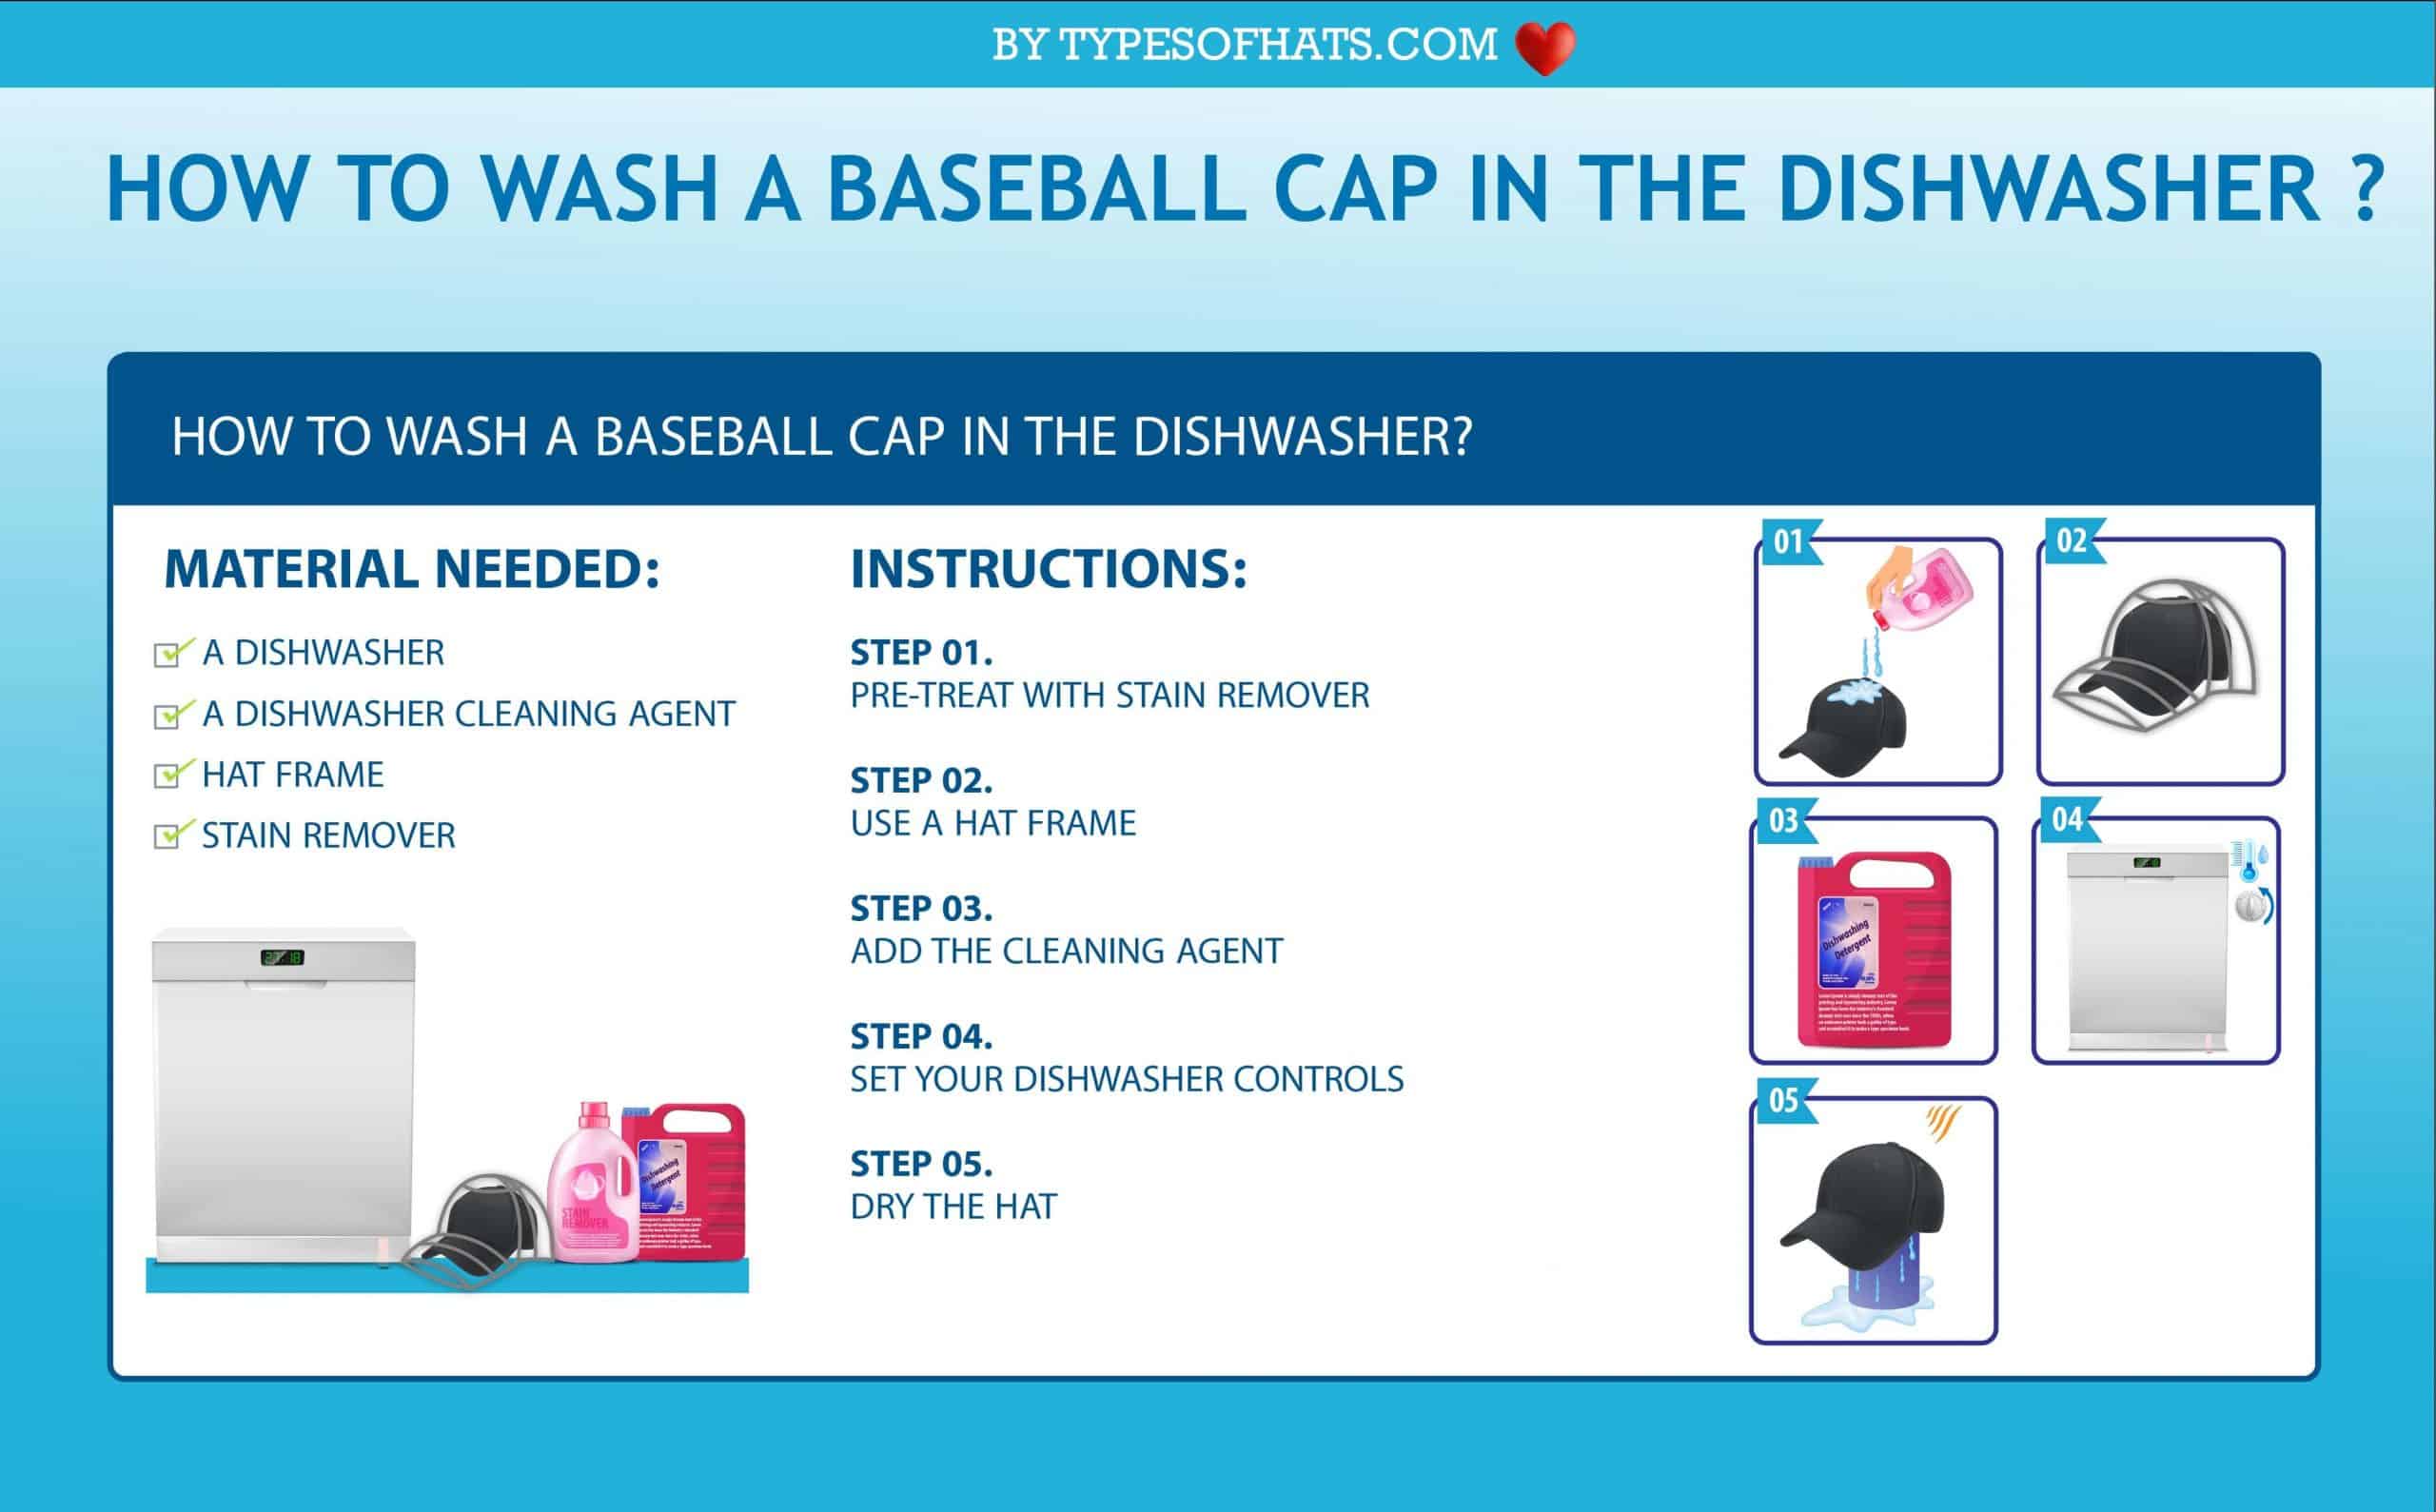 How To Wash A Baseball Cap In The Dishwasher info